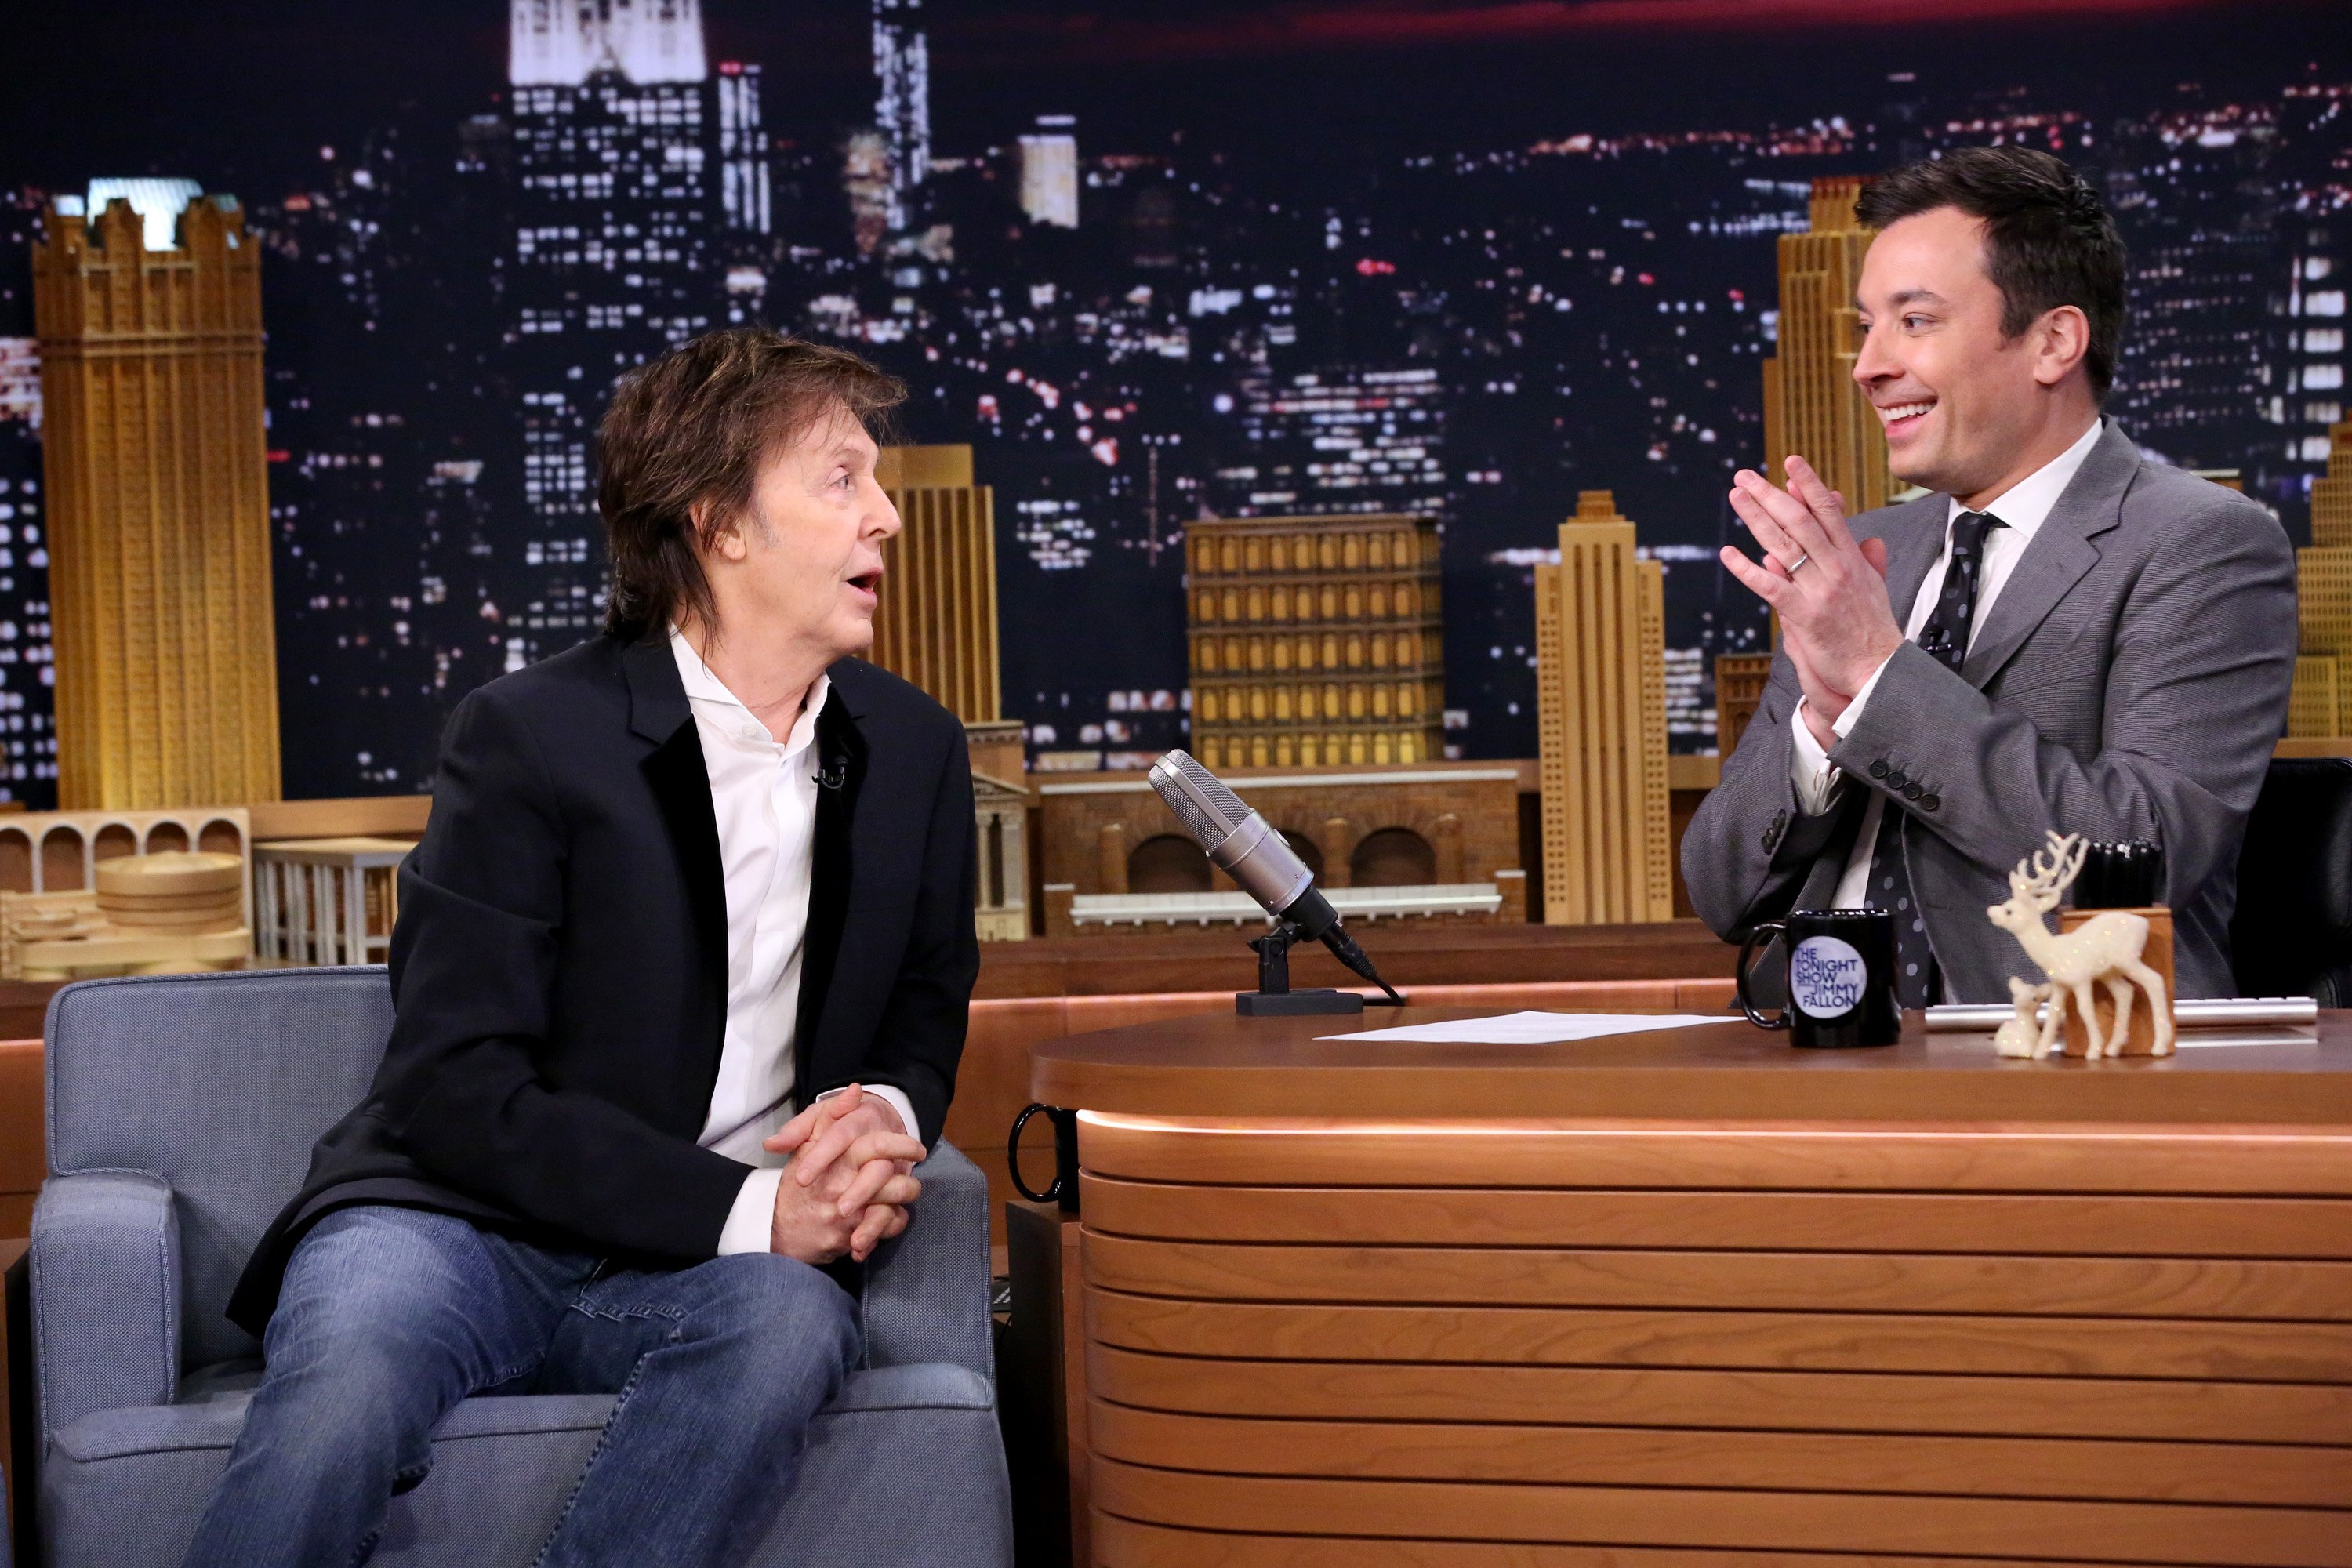 Paul McCartney appears with host Jimmy Fallon on a 2014 episode of The Tonight Show Starring Jimmy Fallon